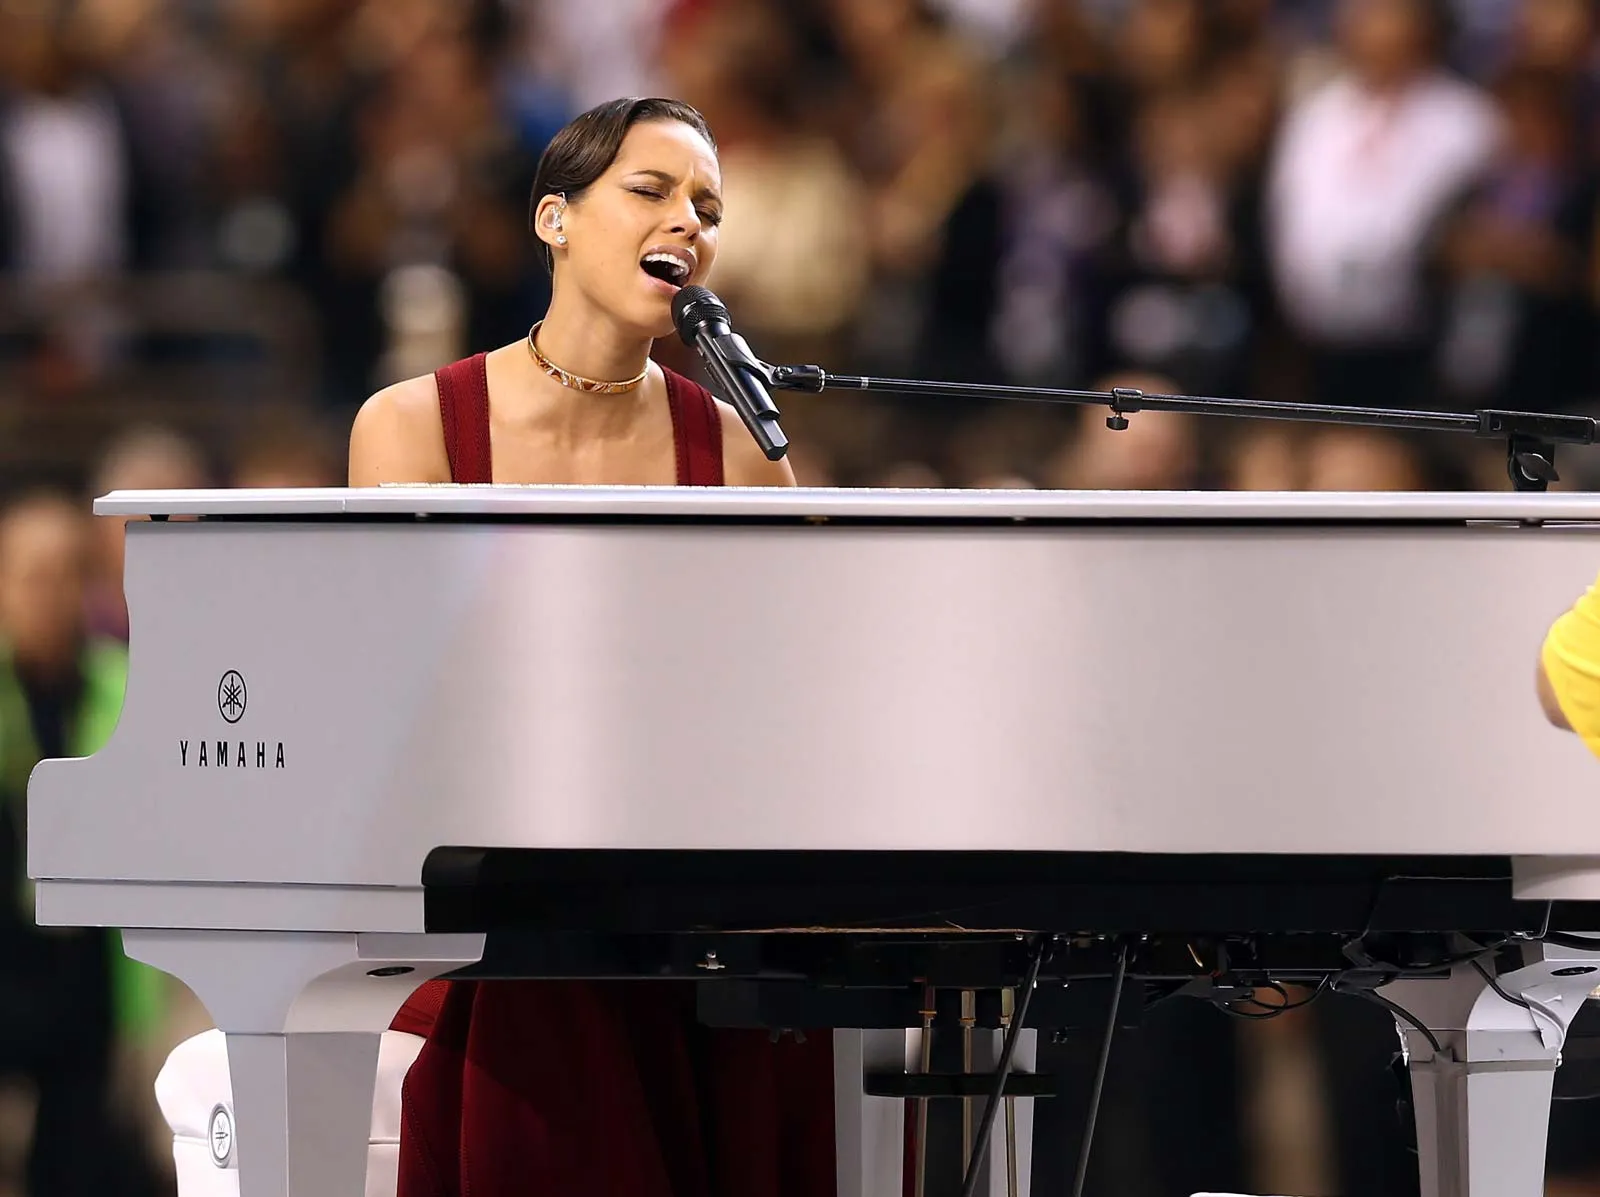 Alicia Keys The Pianist with a Powerful Voice